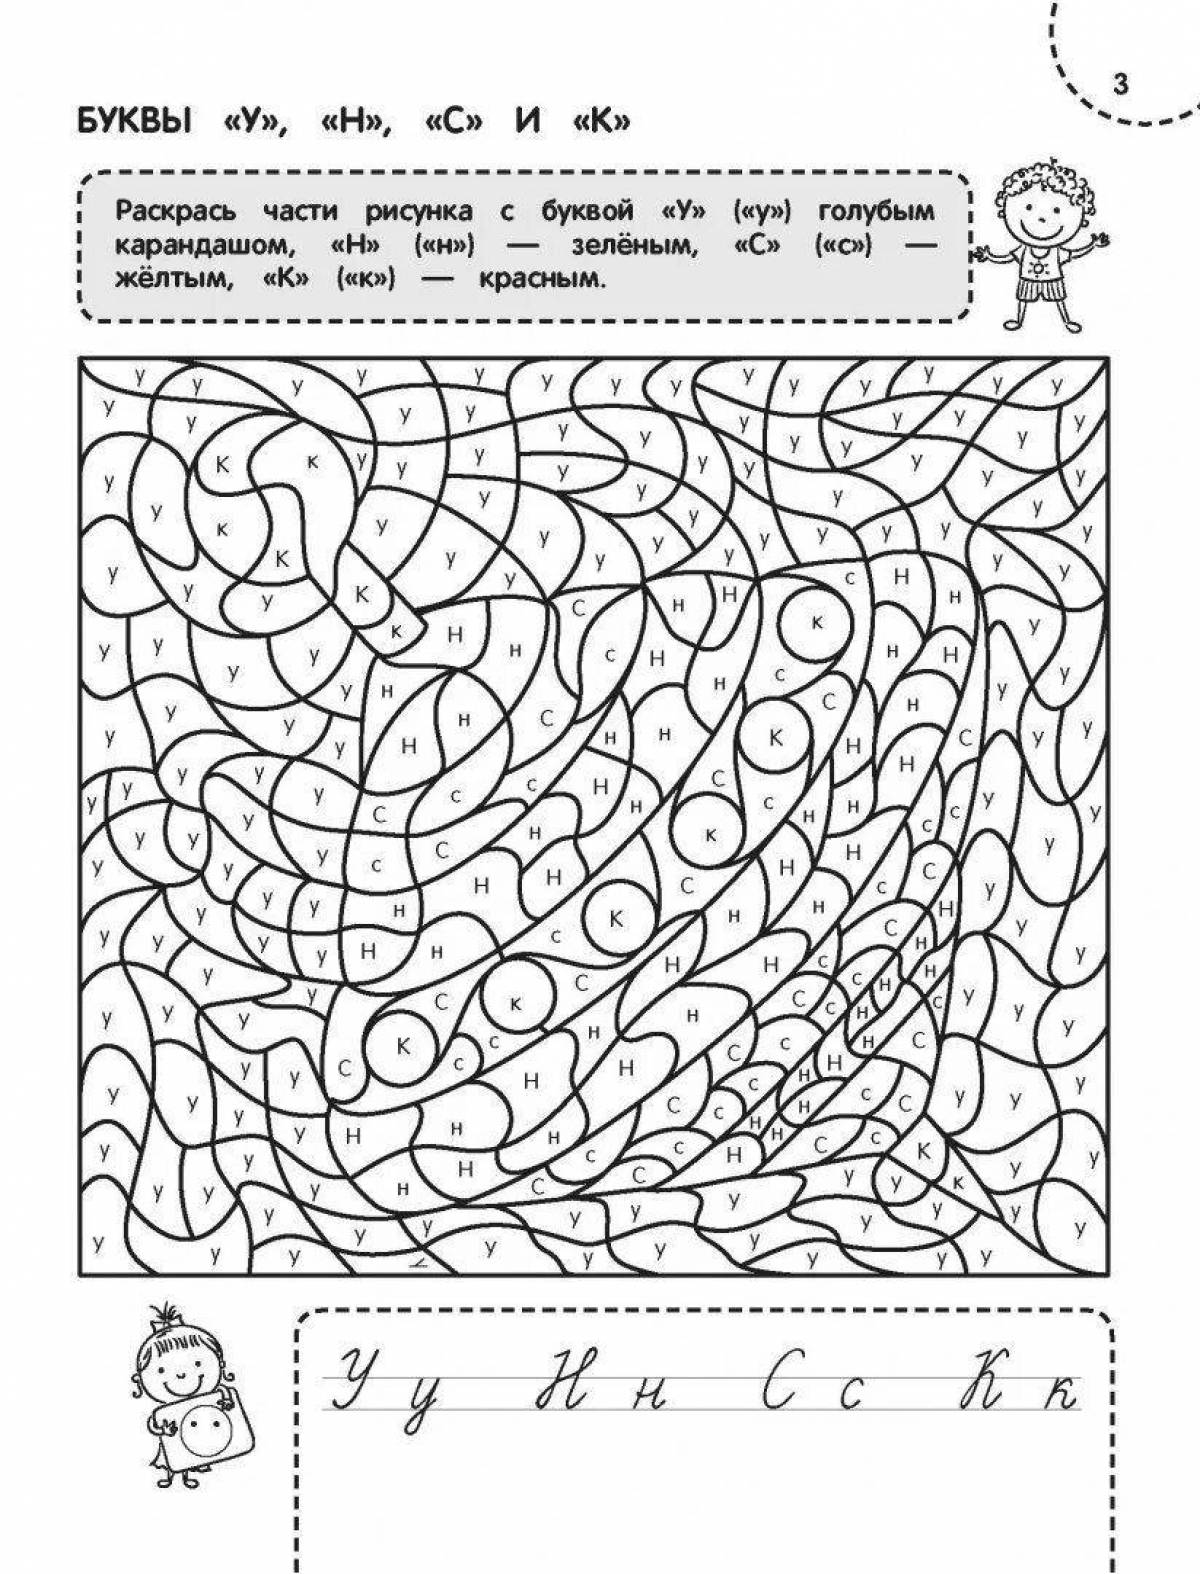 Creative coloring write a simulator without errors Grade 3 answers